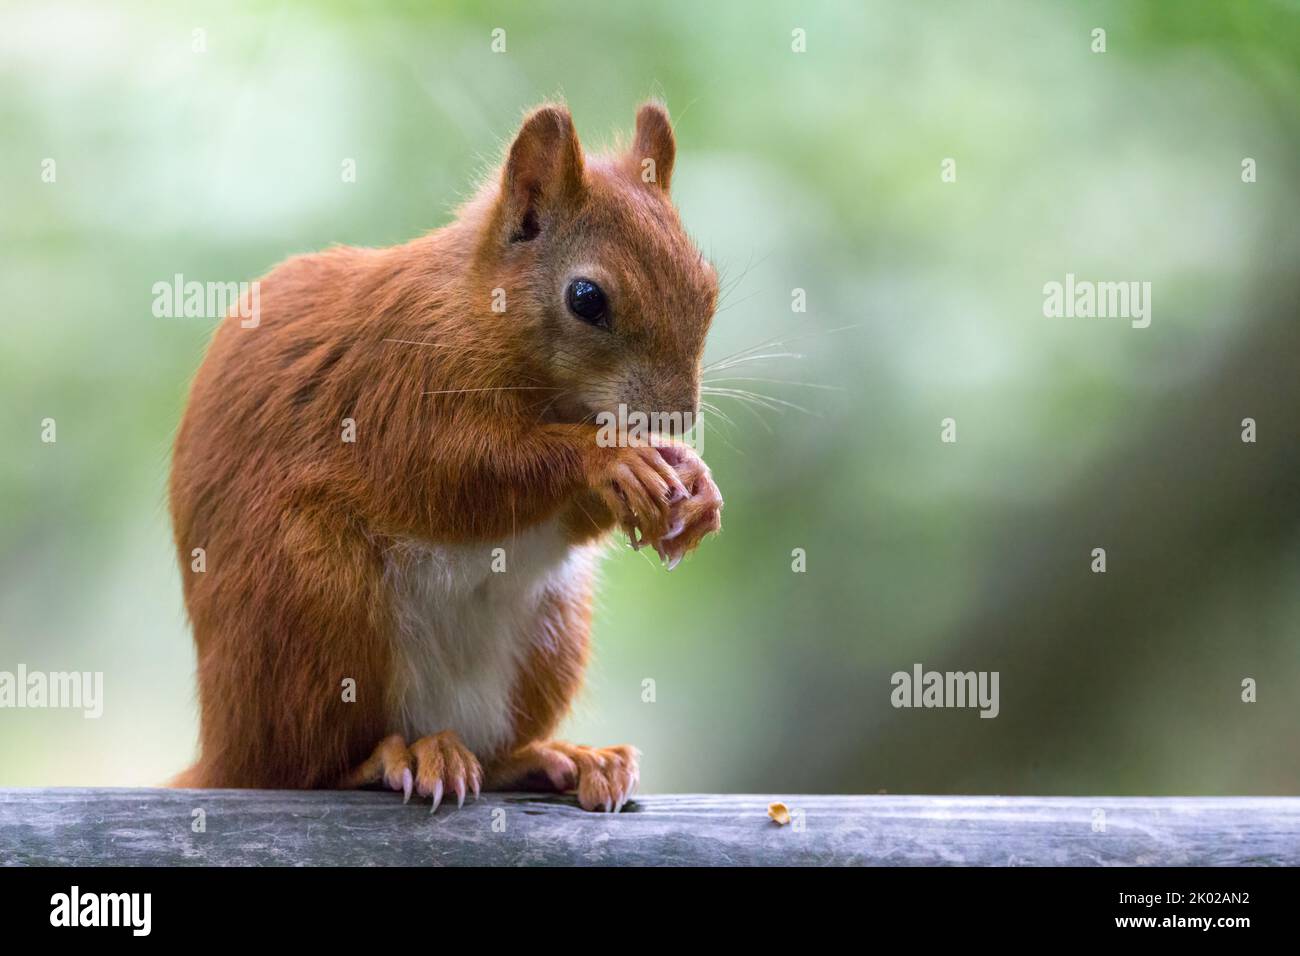 Red squirrel (sciurus vulgaris) bright chestnut fur with orange brown feet and lower leg a large bushy tail and ear tufts that are longer in winter Stock Photo